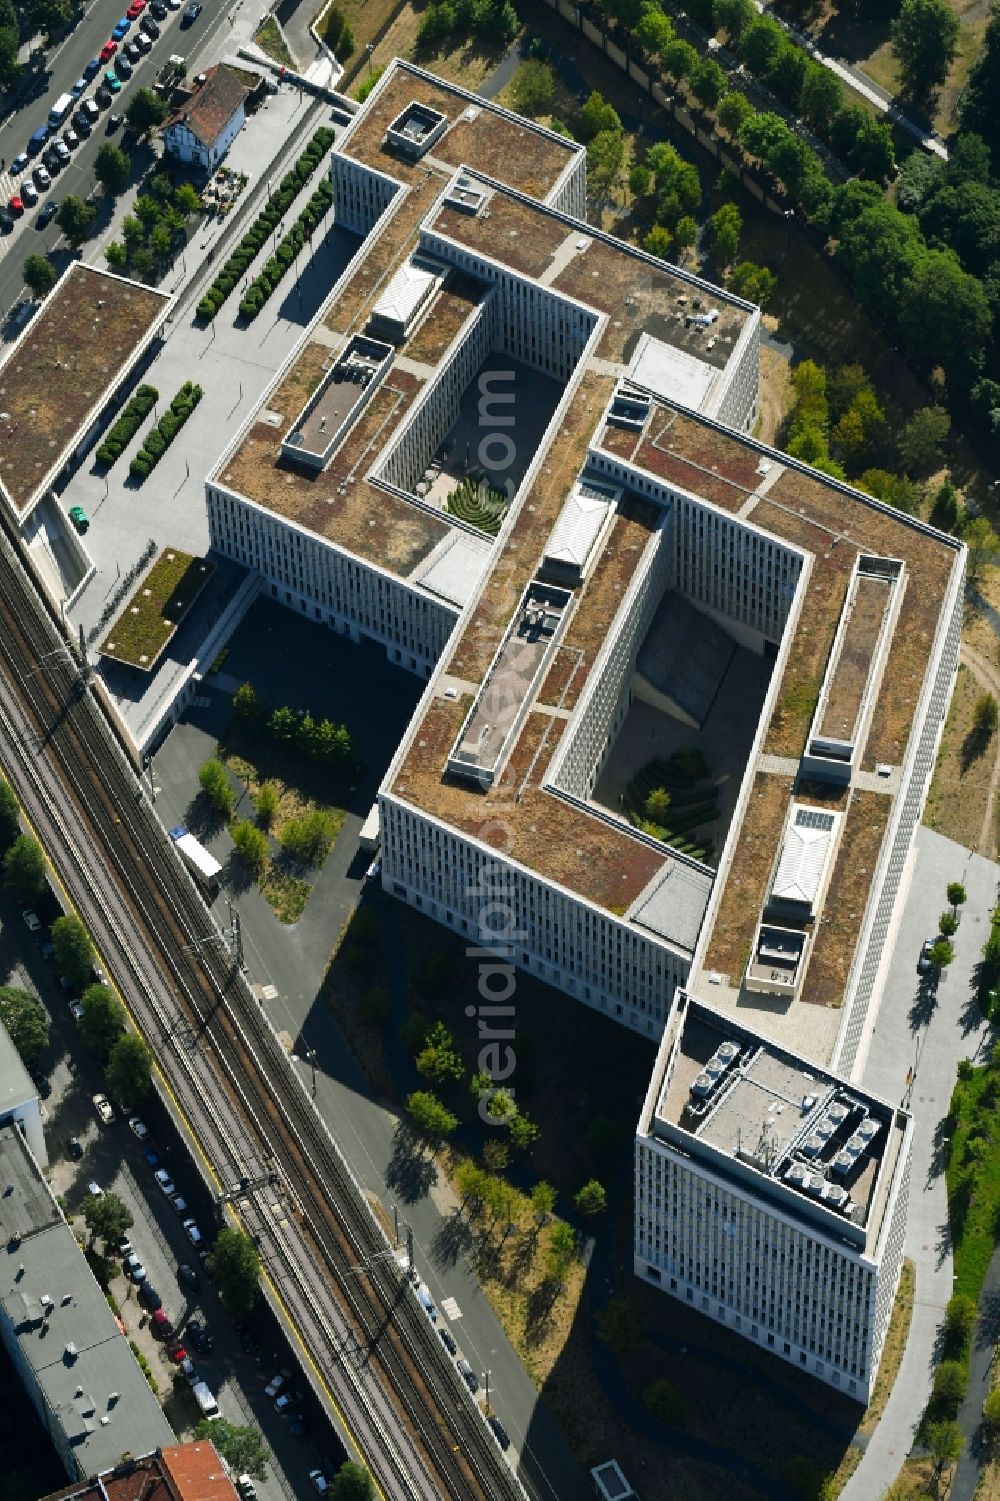 Aerial image Berlin - Federal Ministry of the Interior / Home Office in Berlin Moabit